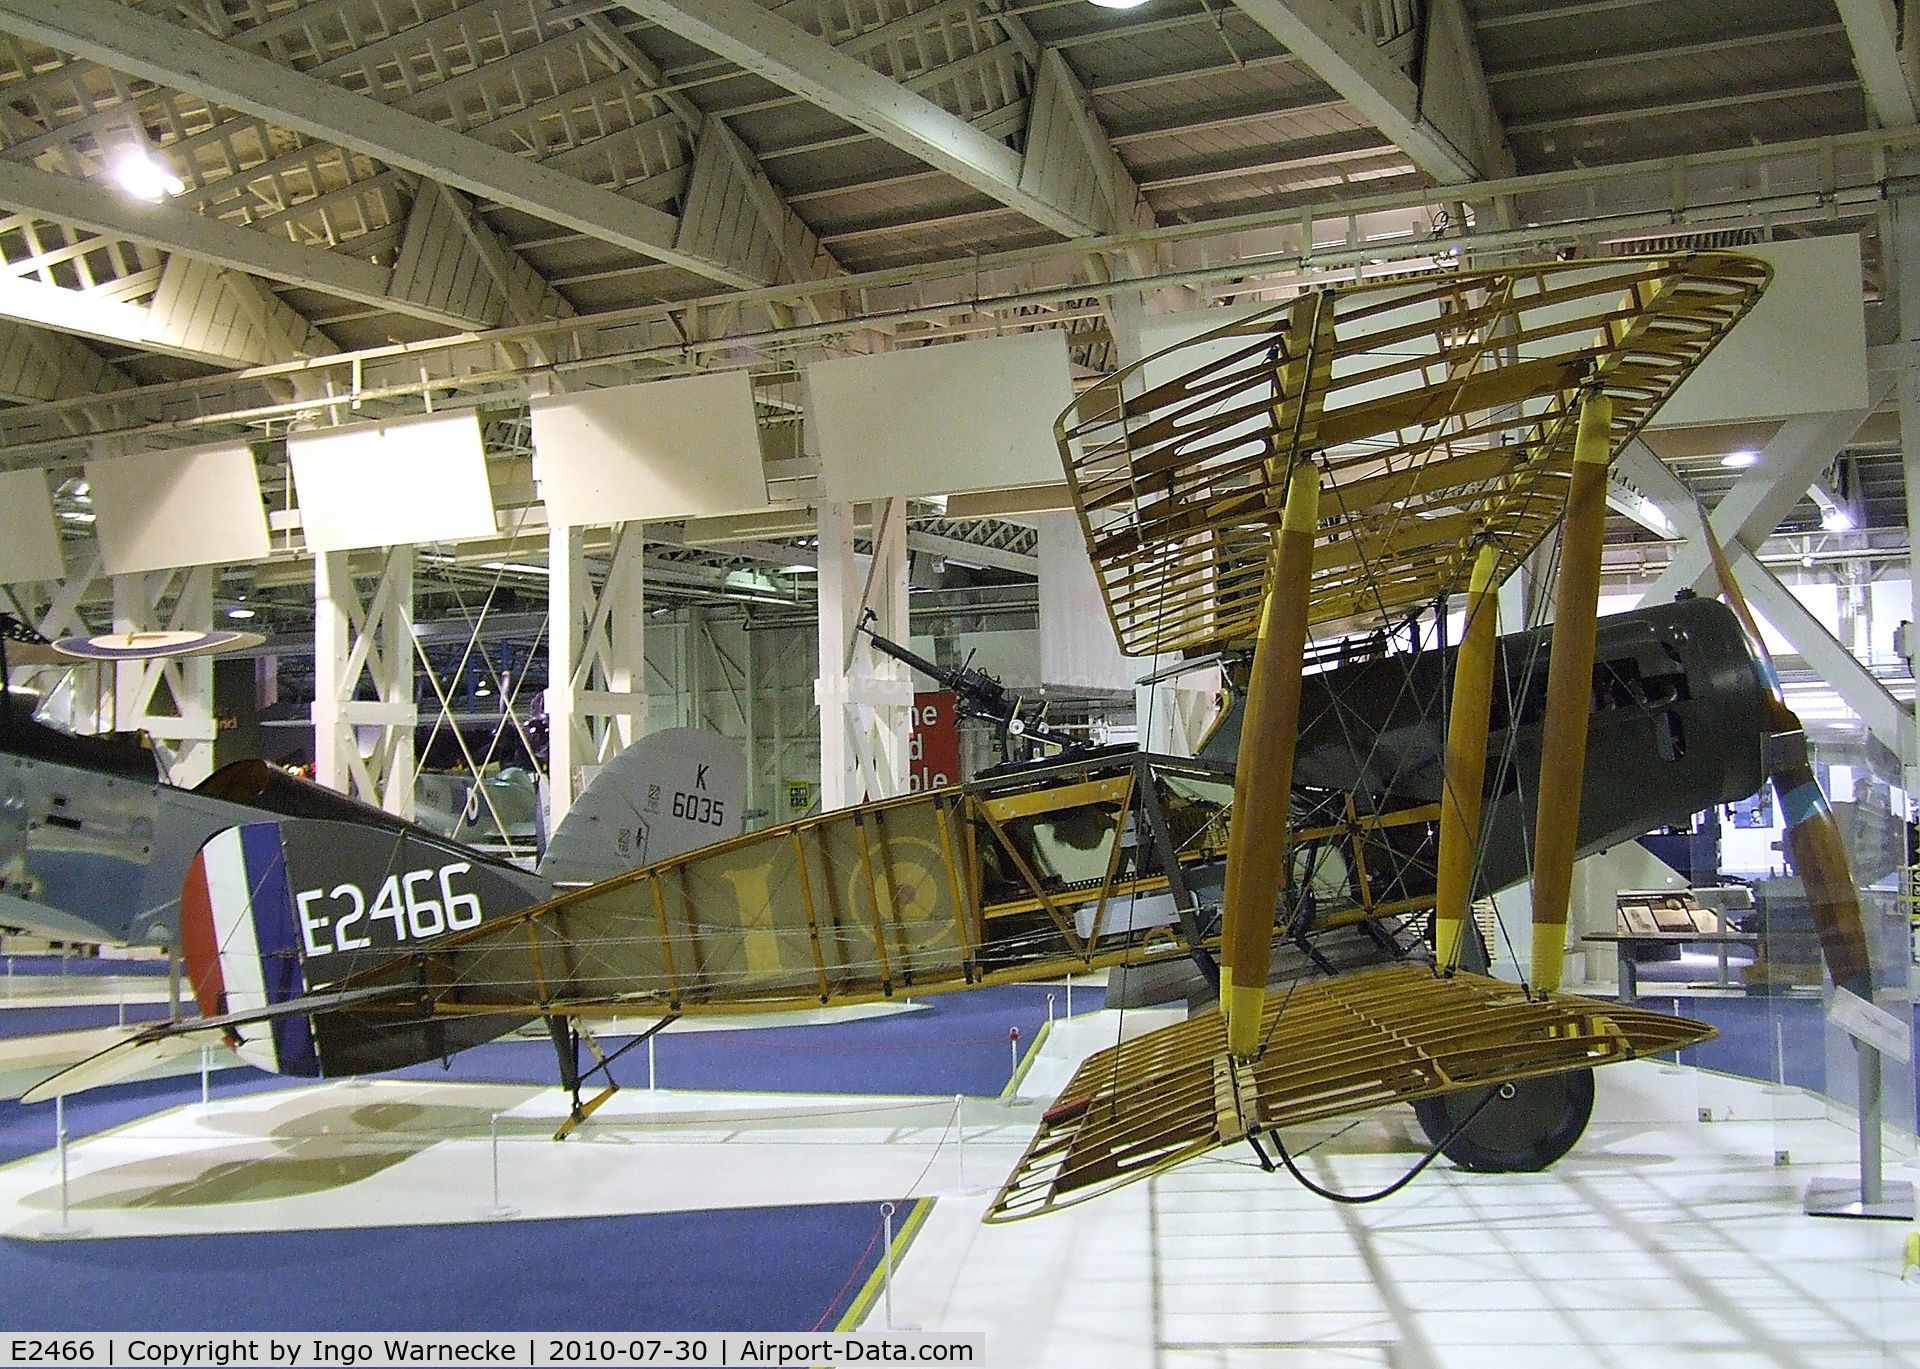 E2466, Bristol F.2B Fighter C/N Composite, Bristol F.2B Fighter (minus starboard outer skin) at the RAF Museum, Hendon